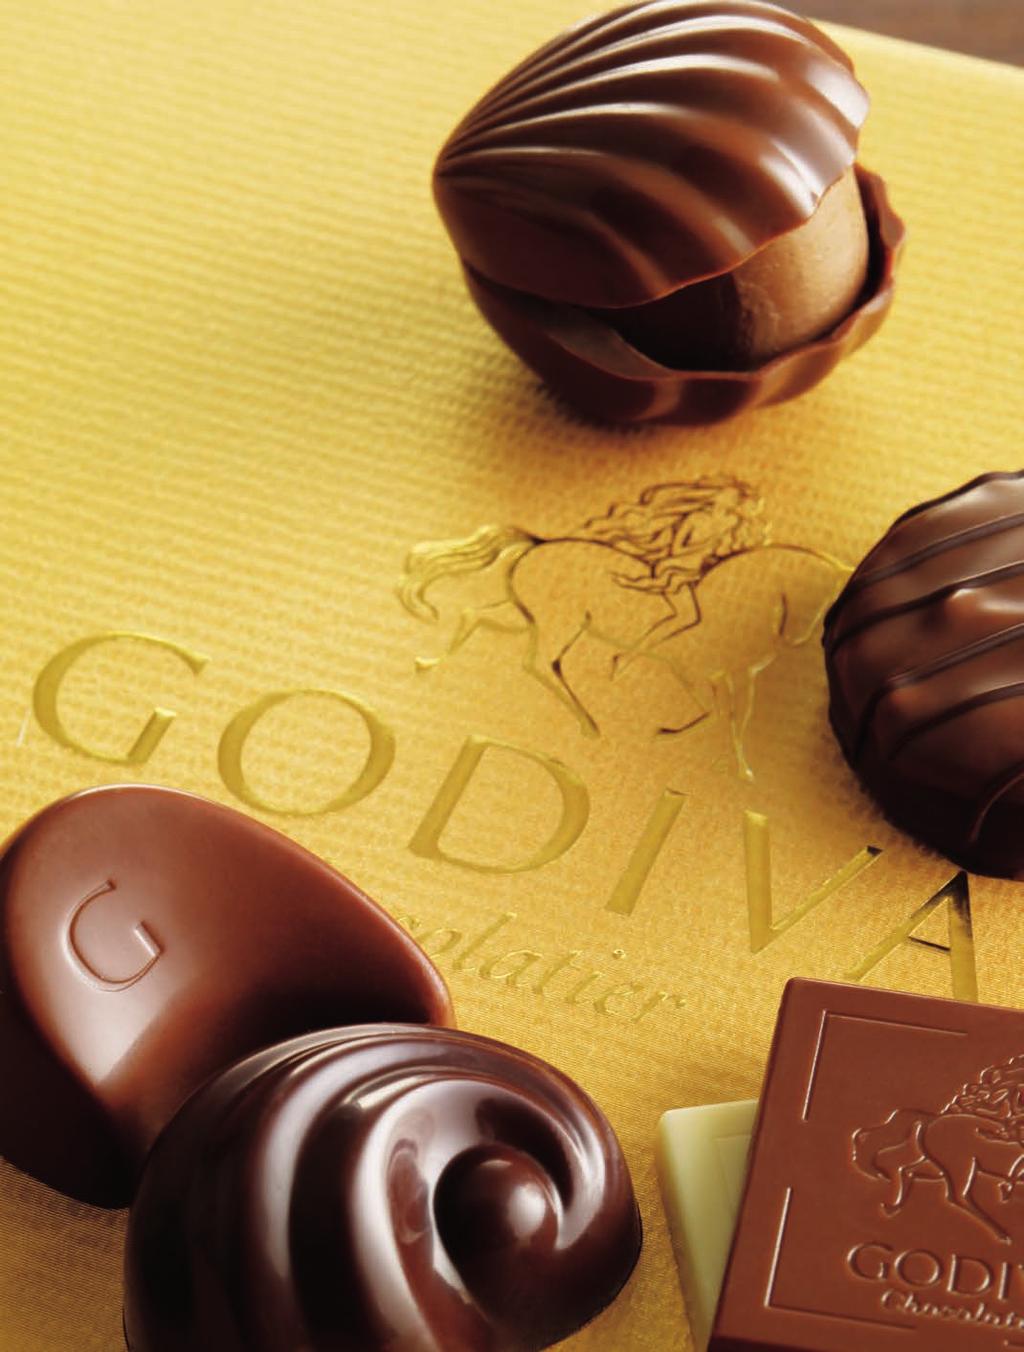 POLOGY RETENTION PPREITION The Golden Rule of hocolate: Gift Unto Others. Gold allotins The epitome of GOIV elgian chocolate.